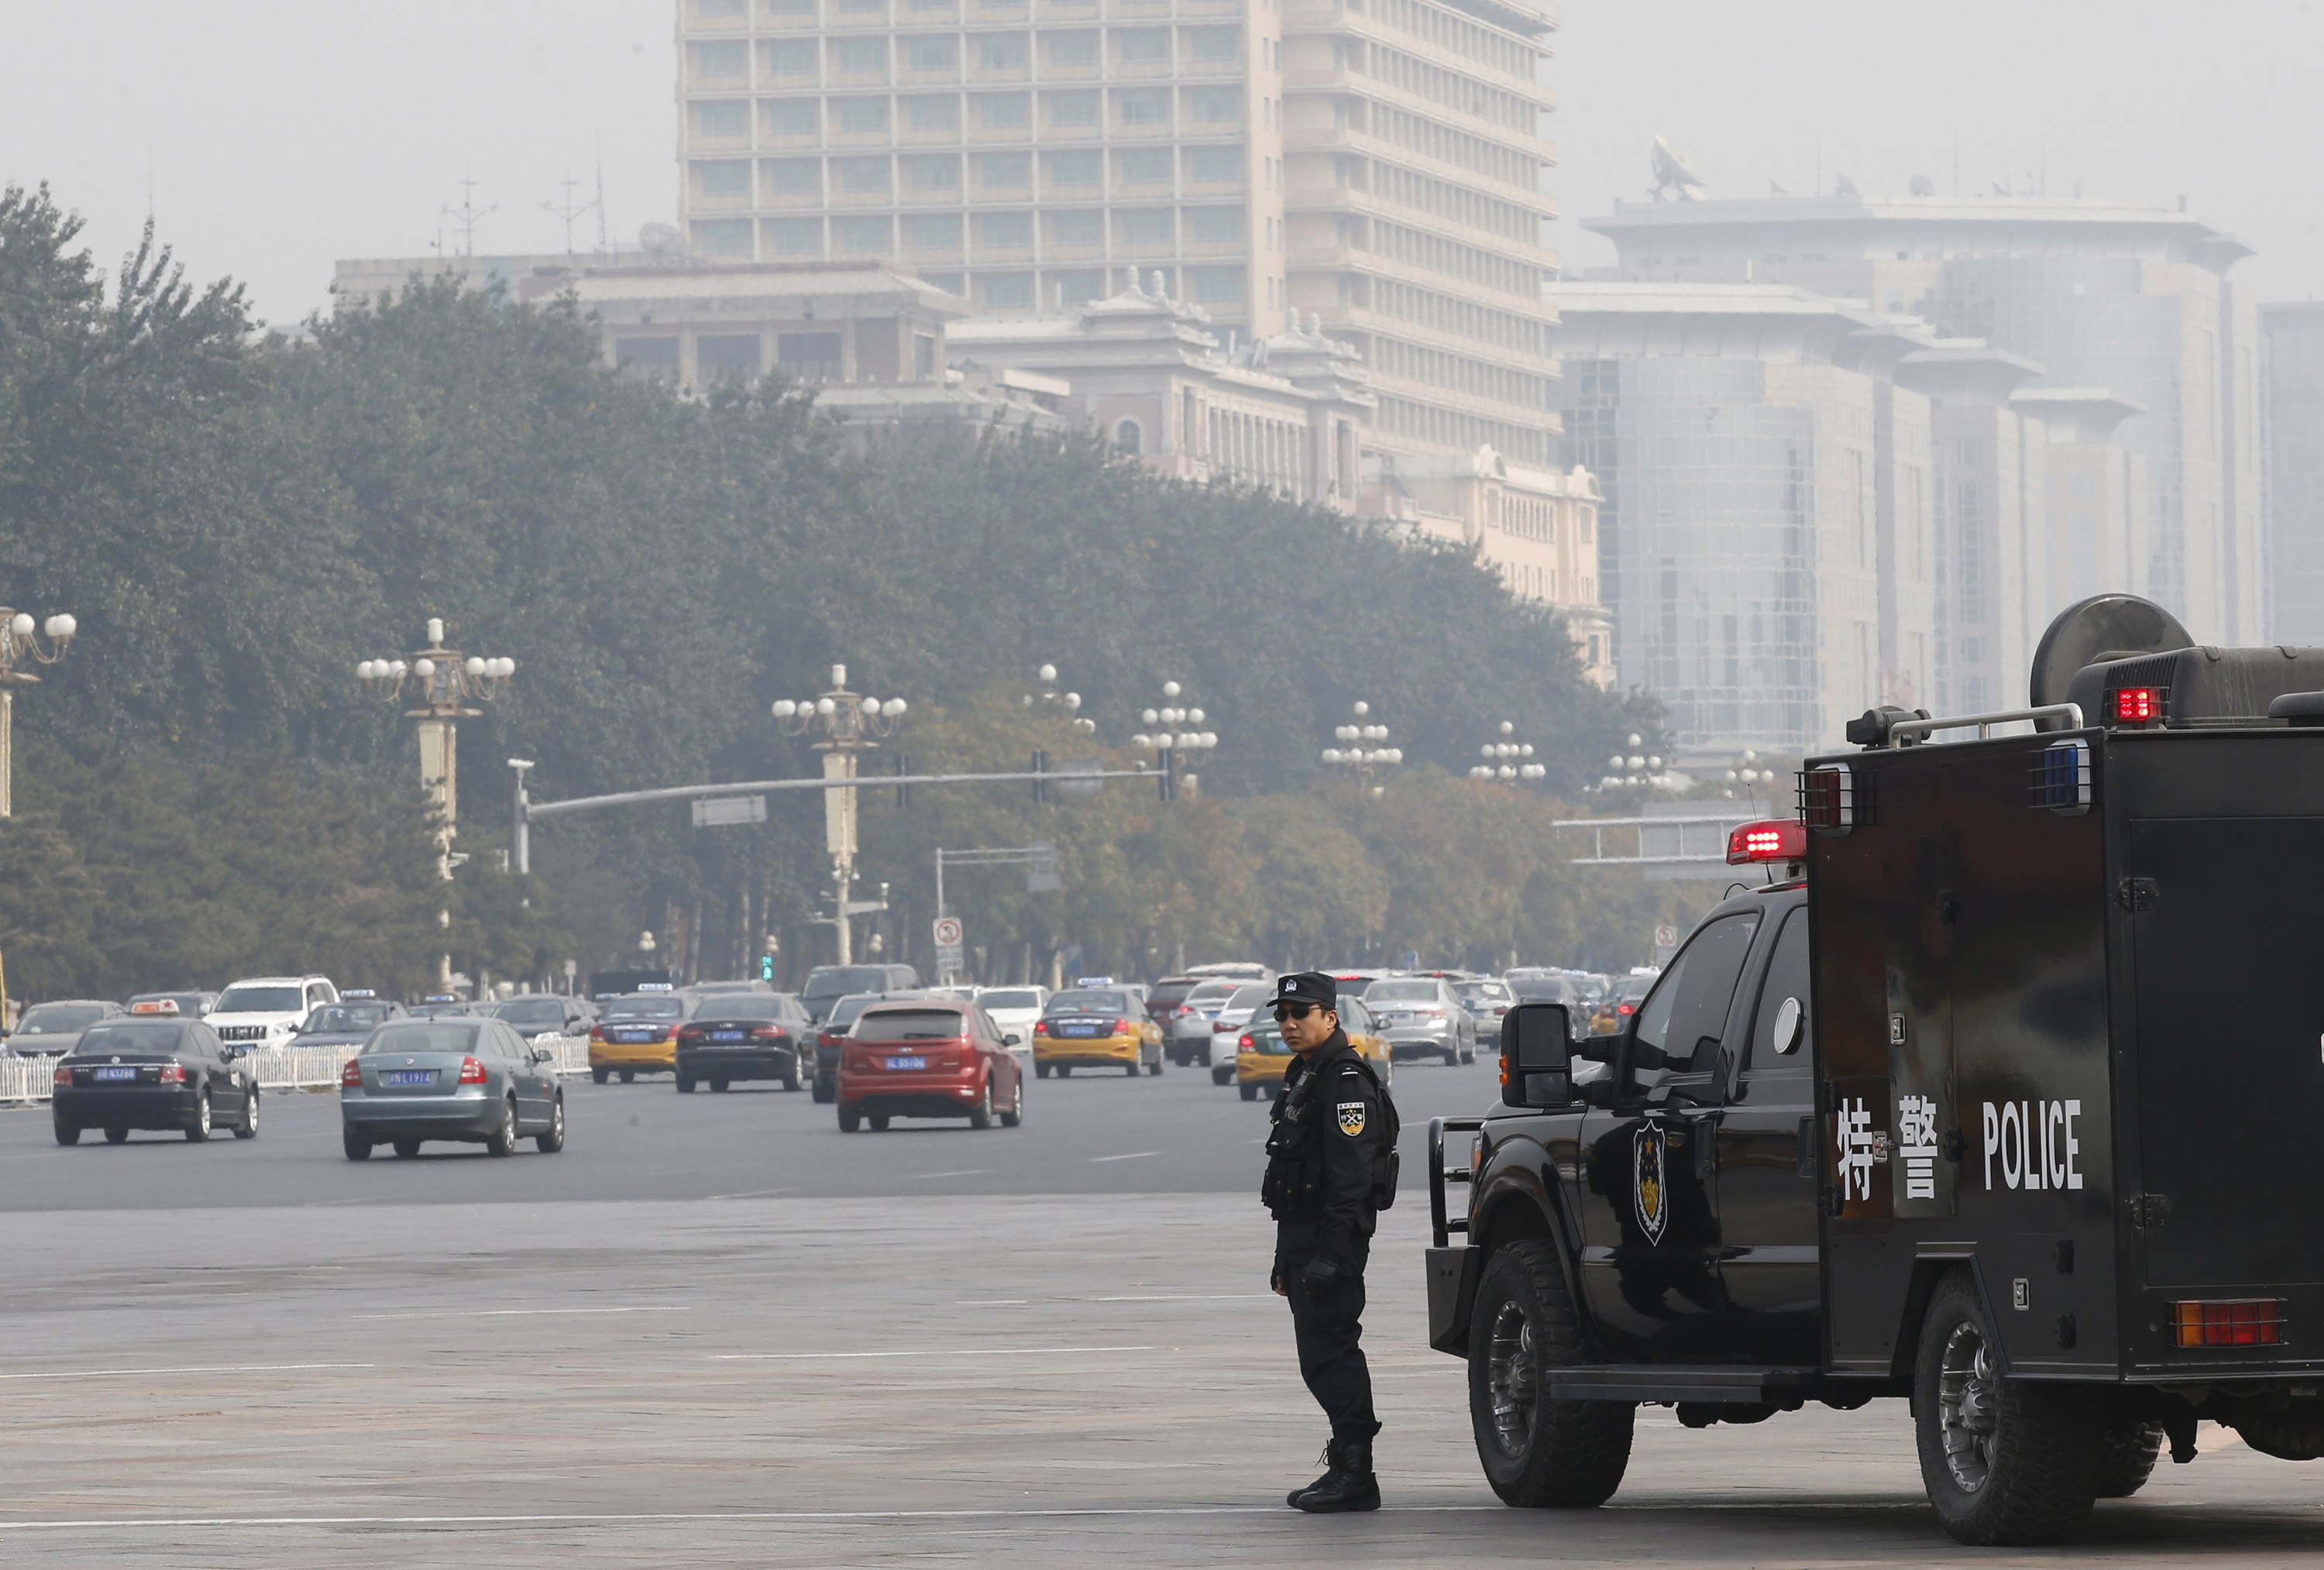 A policeman of the Special Weapons and Tactics team stands guard on a main street next to Tiananmen Square in Beijing. Photo: Reuters